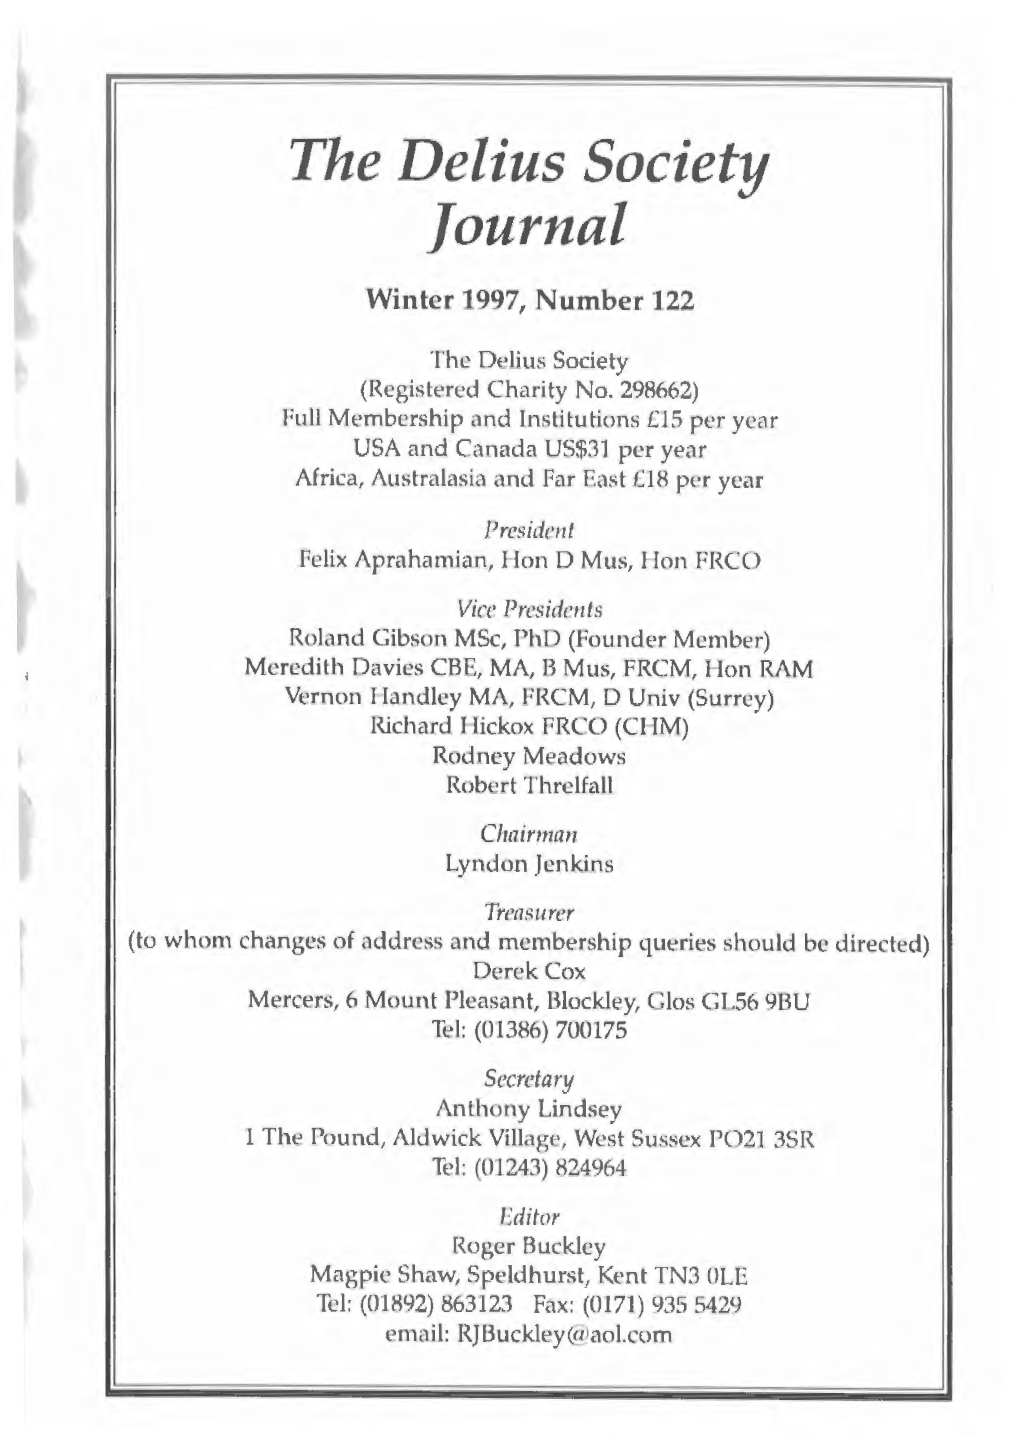 The Delius Society Journal